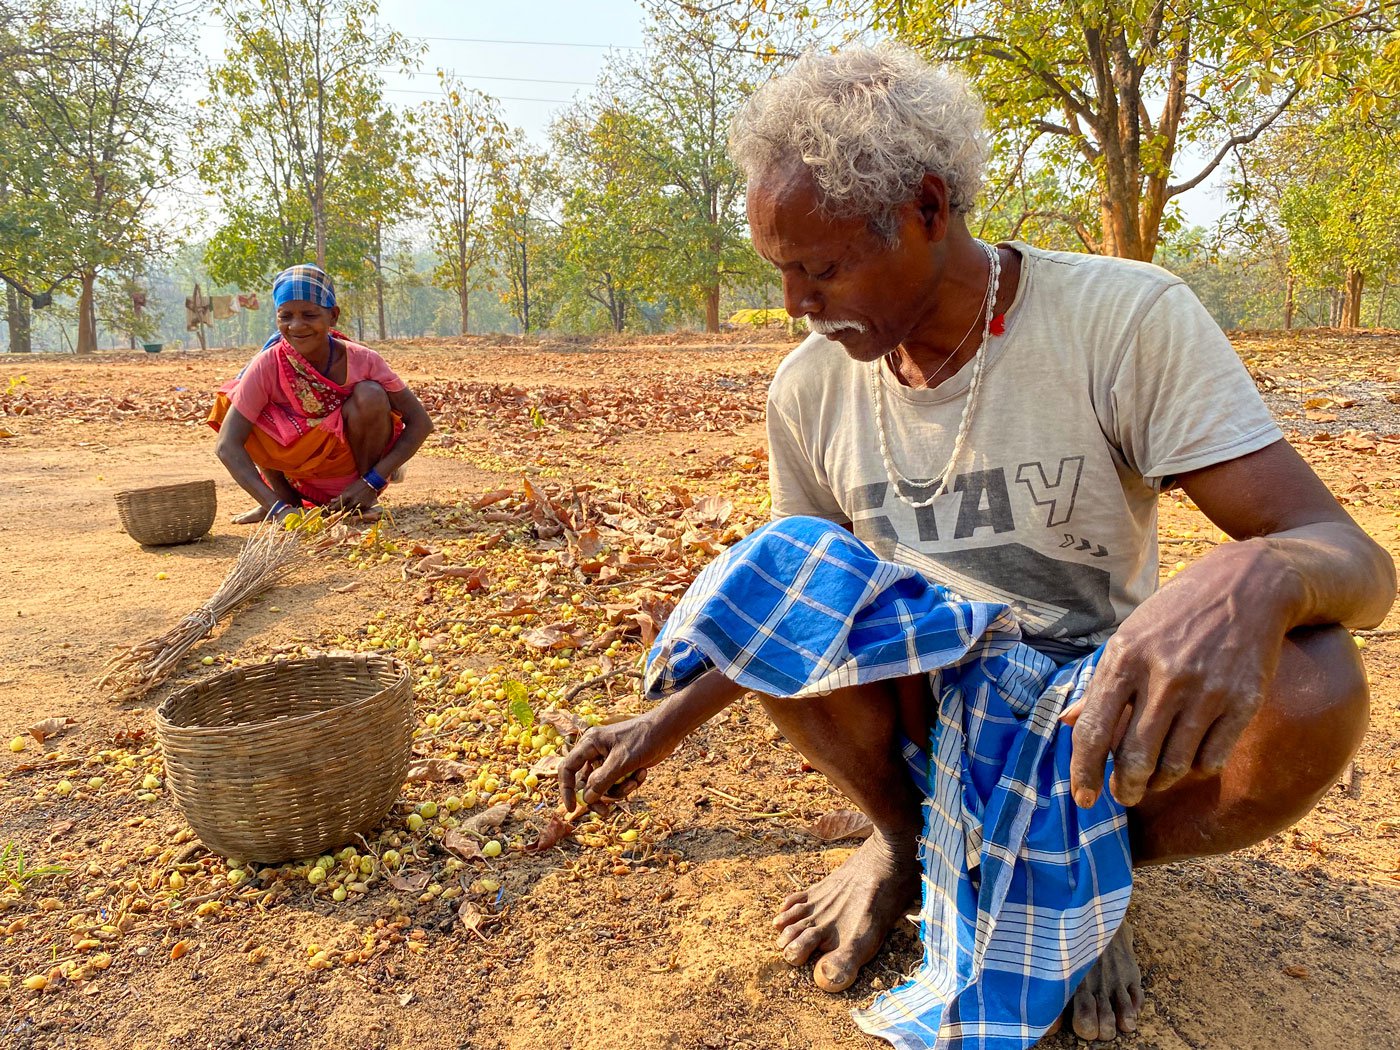 Jalsai Raithi and his wife are collecting mahua from their own tree in their field